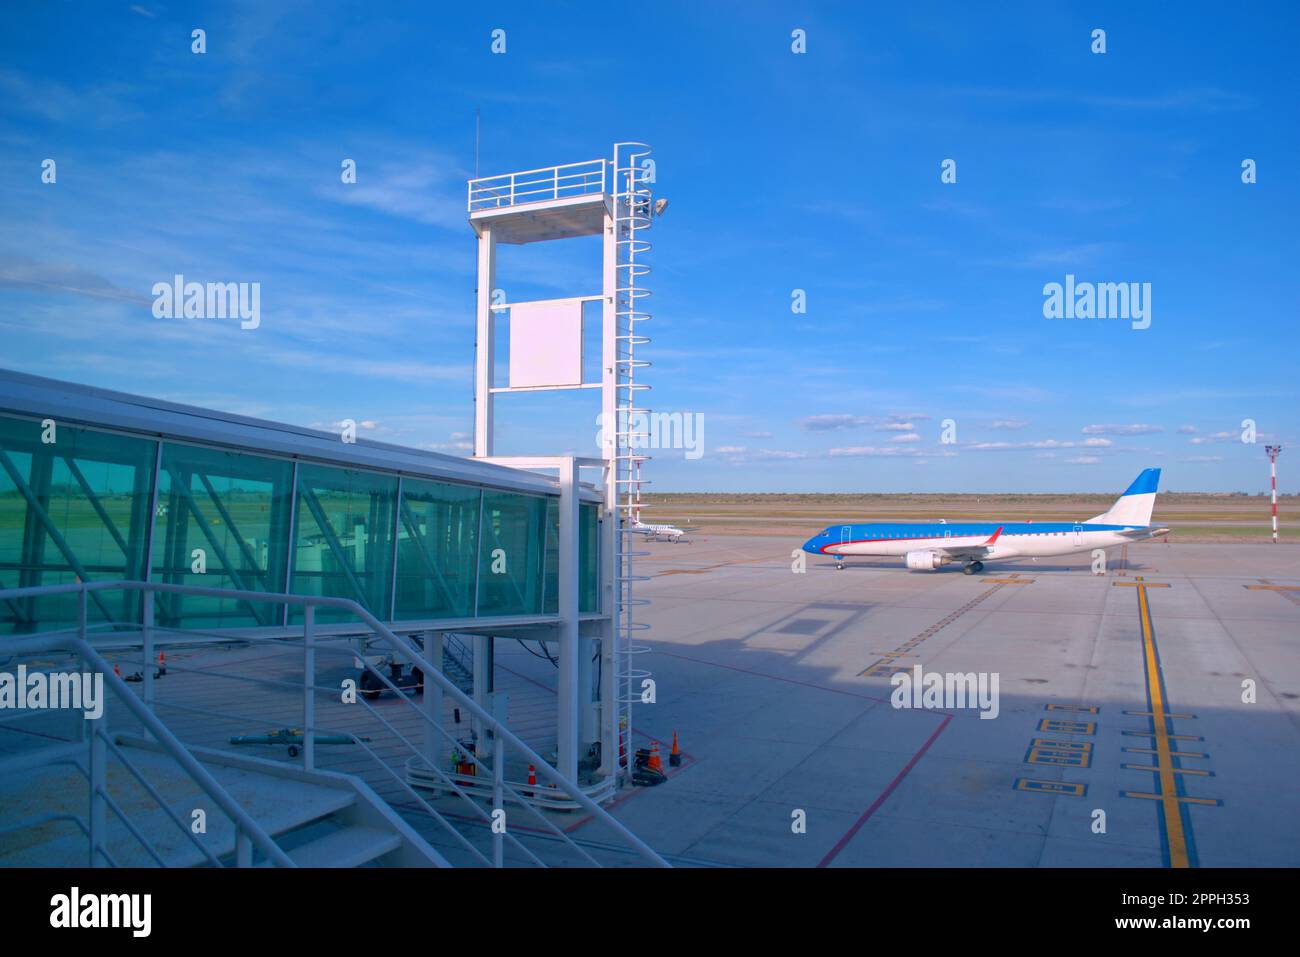 Commercial jet plane taxiing by the boarding bridge of an airport. Stock Photo